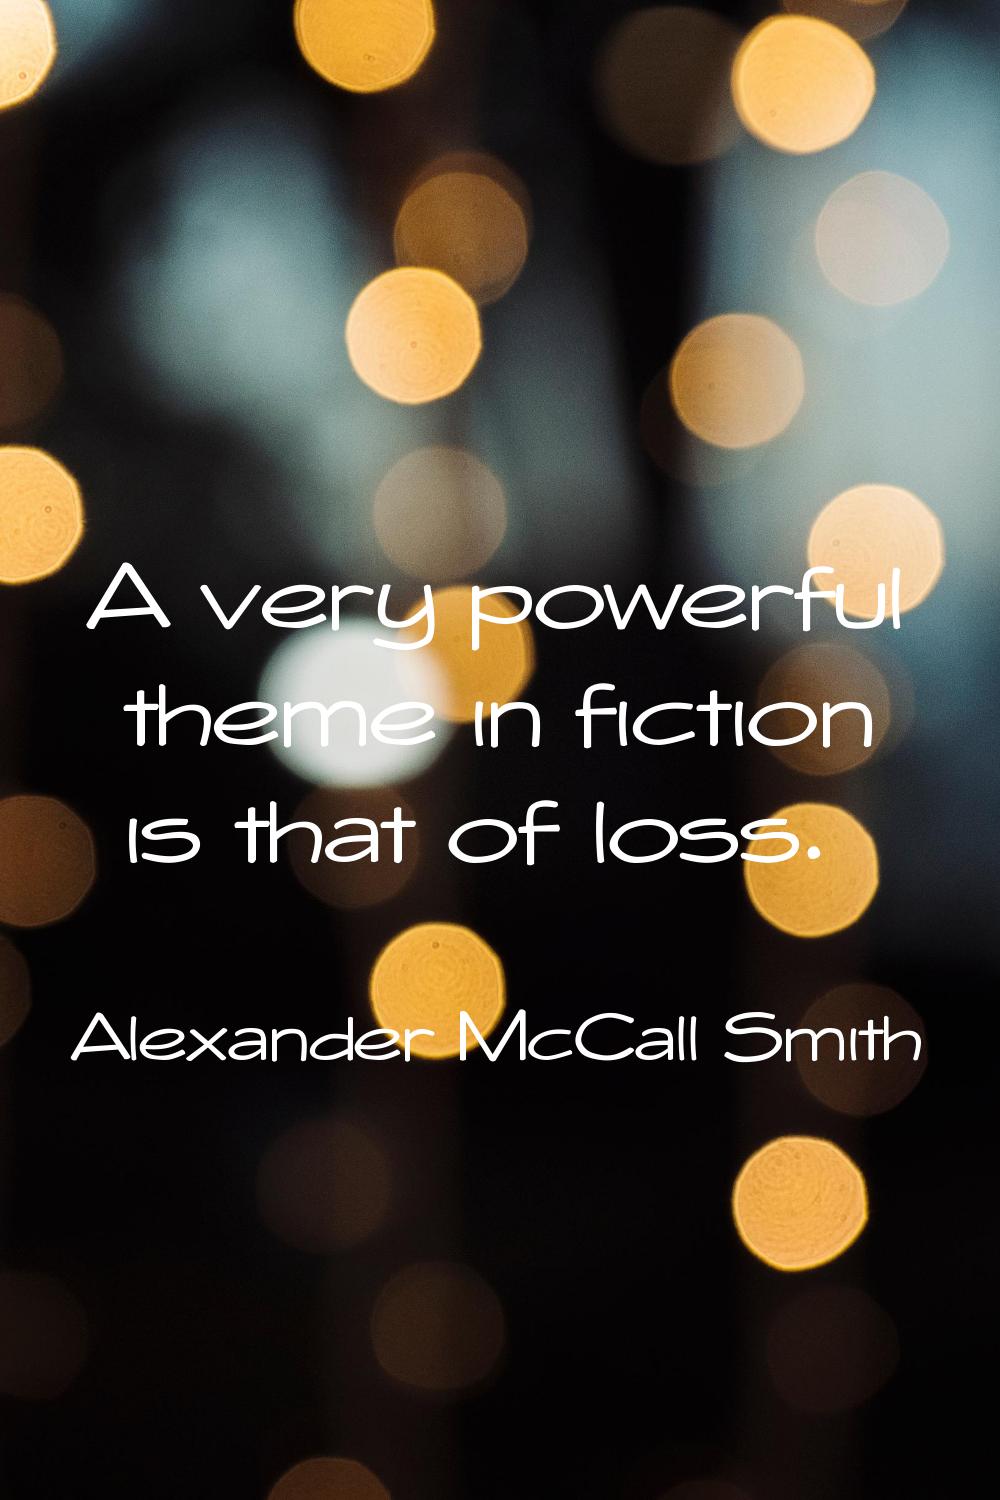 A very powerful theme in fiction is that of loss.